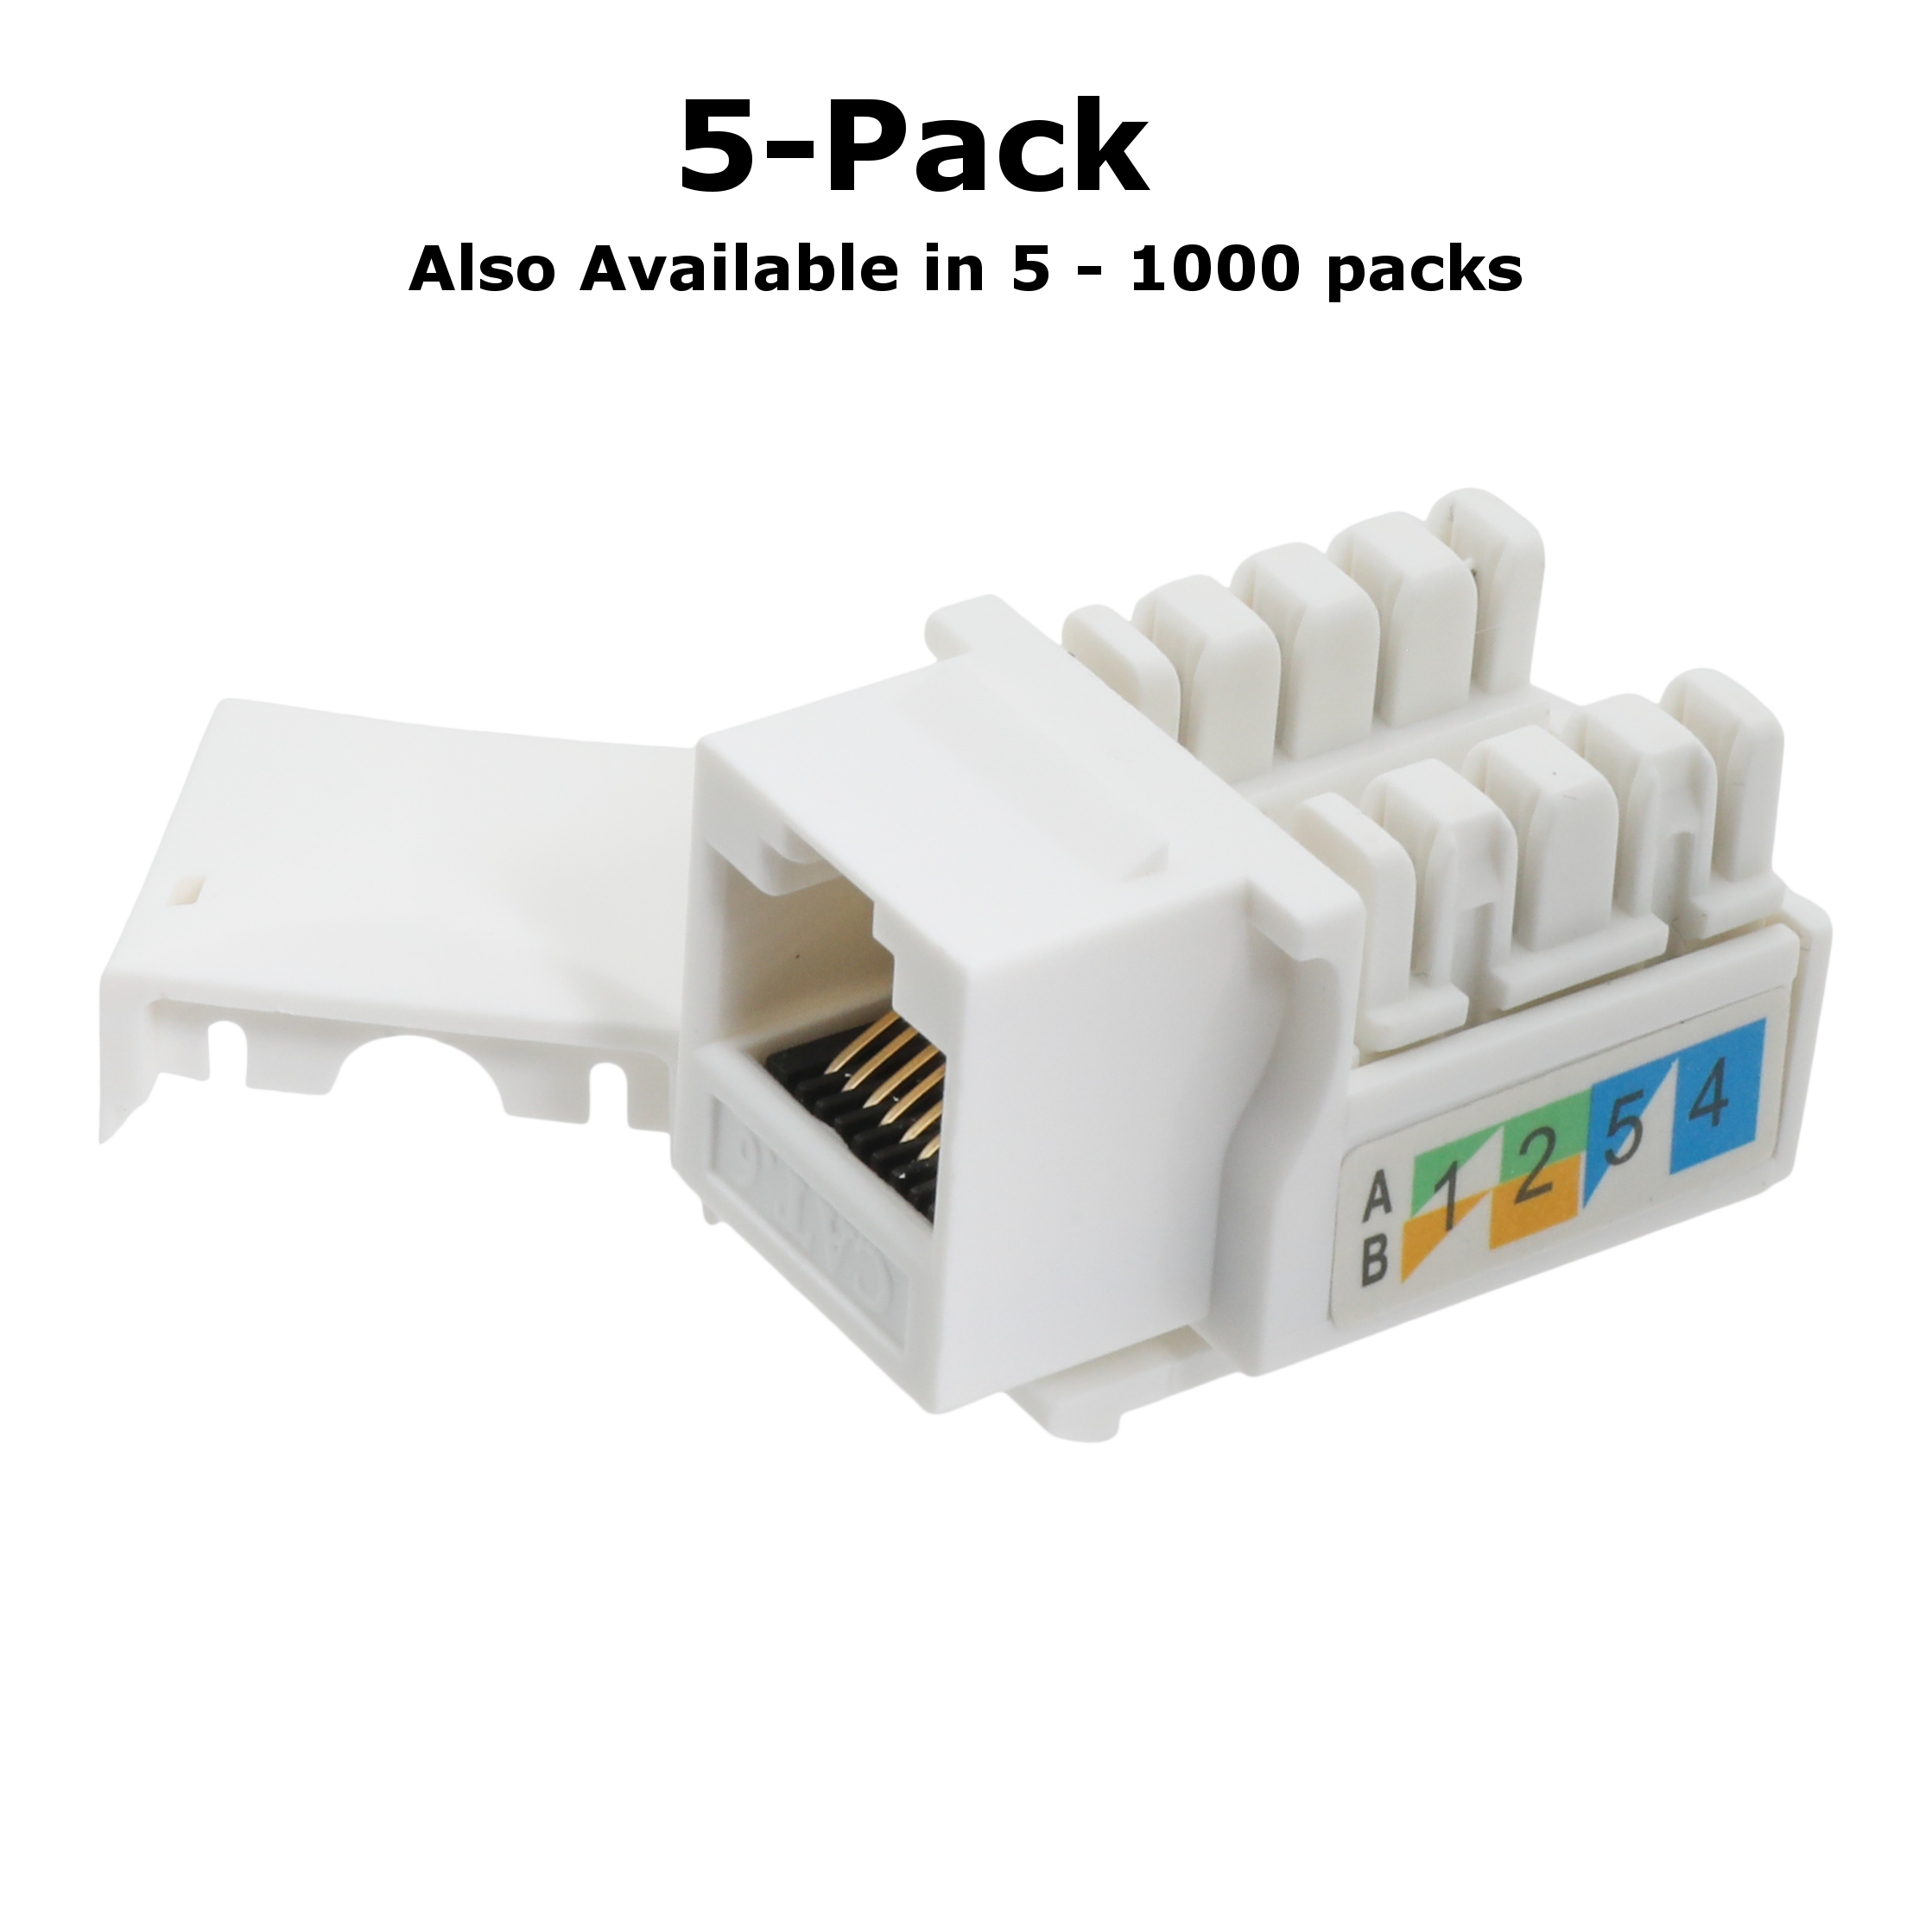 Rj45 Keystone Jack with Dust Cap in white color featuring text indicating the different Rj45 Keystone Jack Cat6 quantities available.